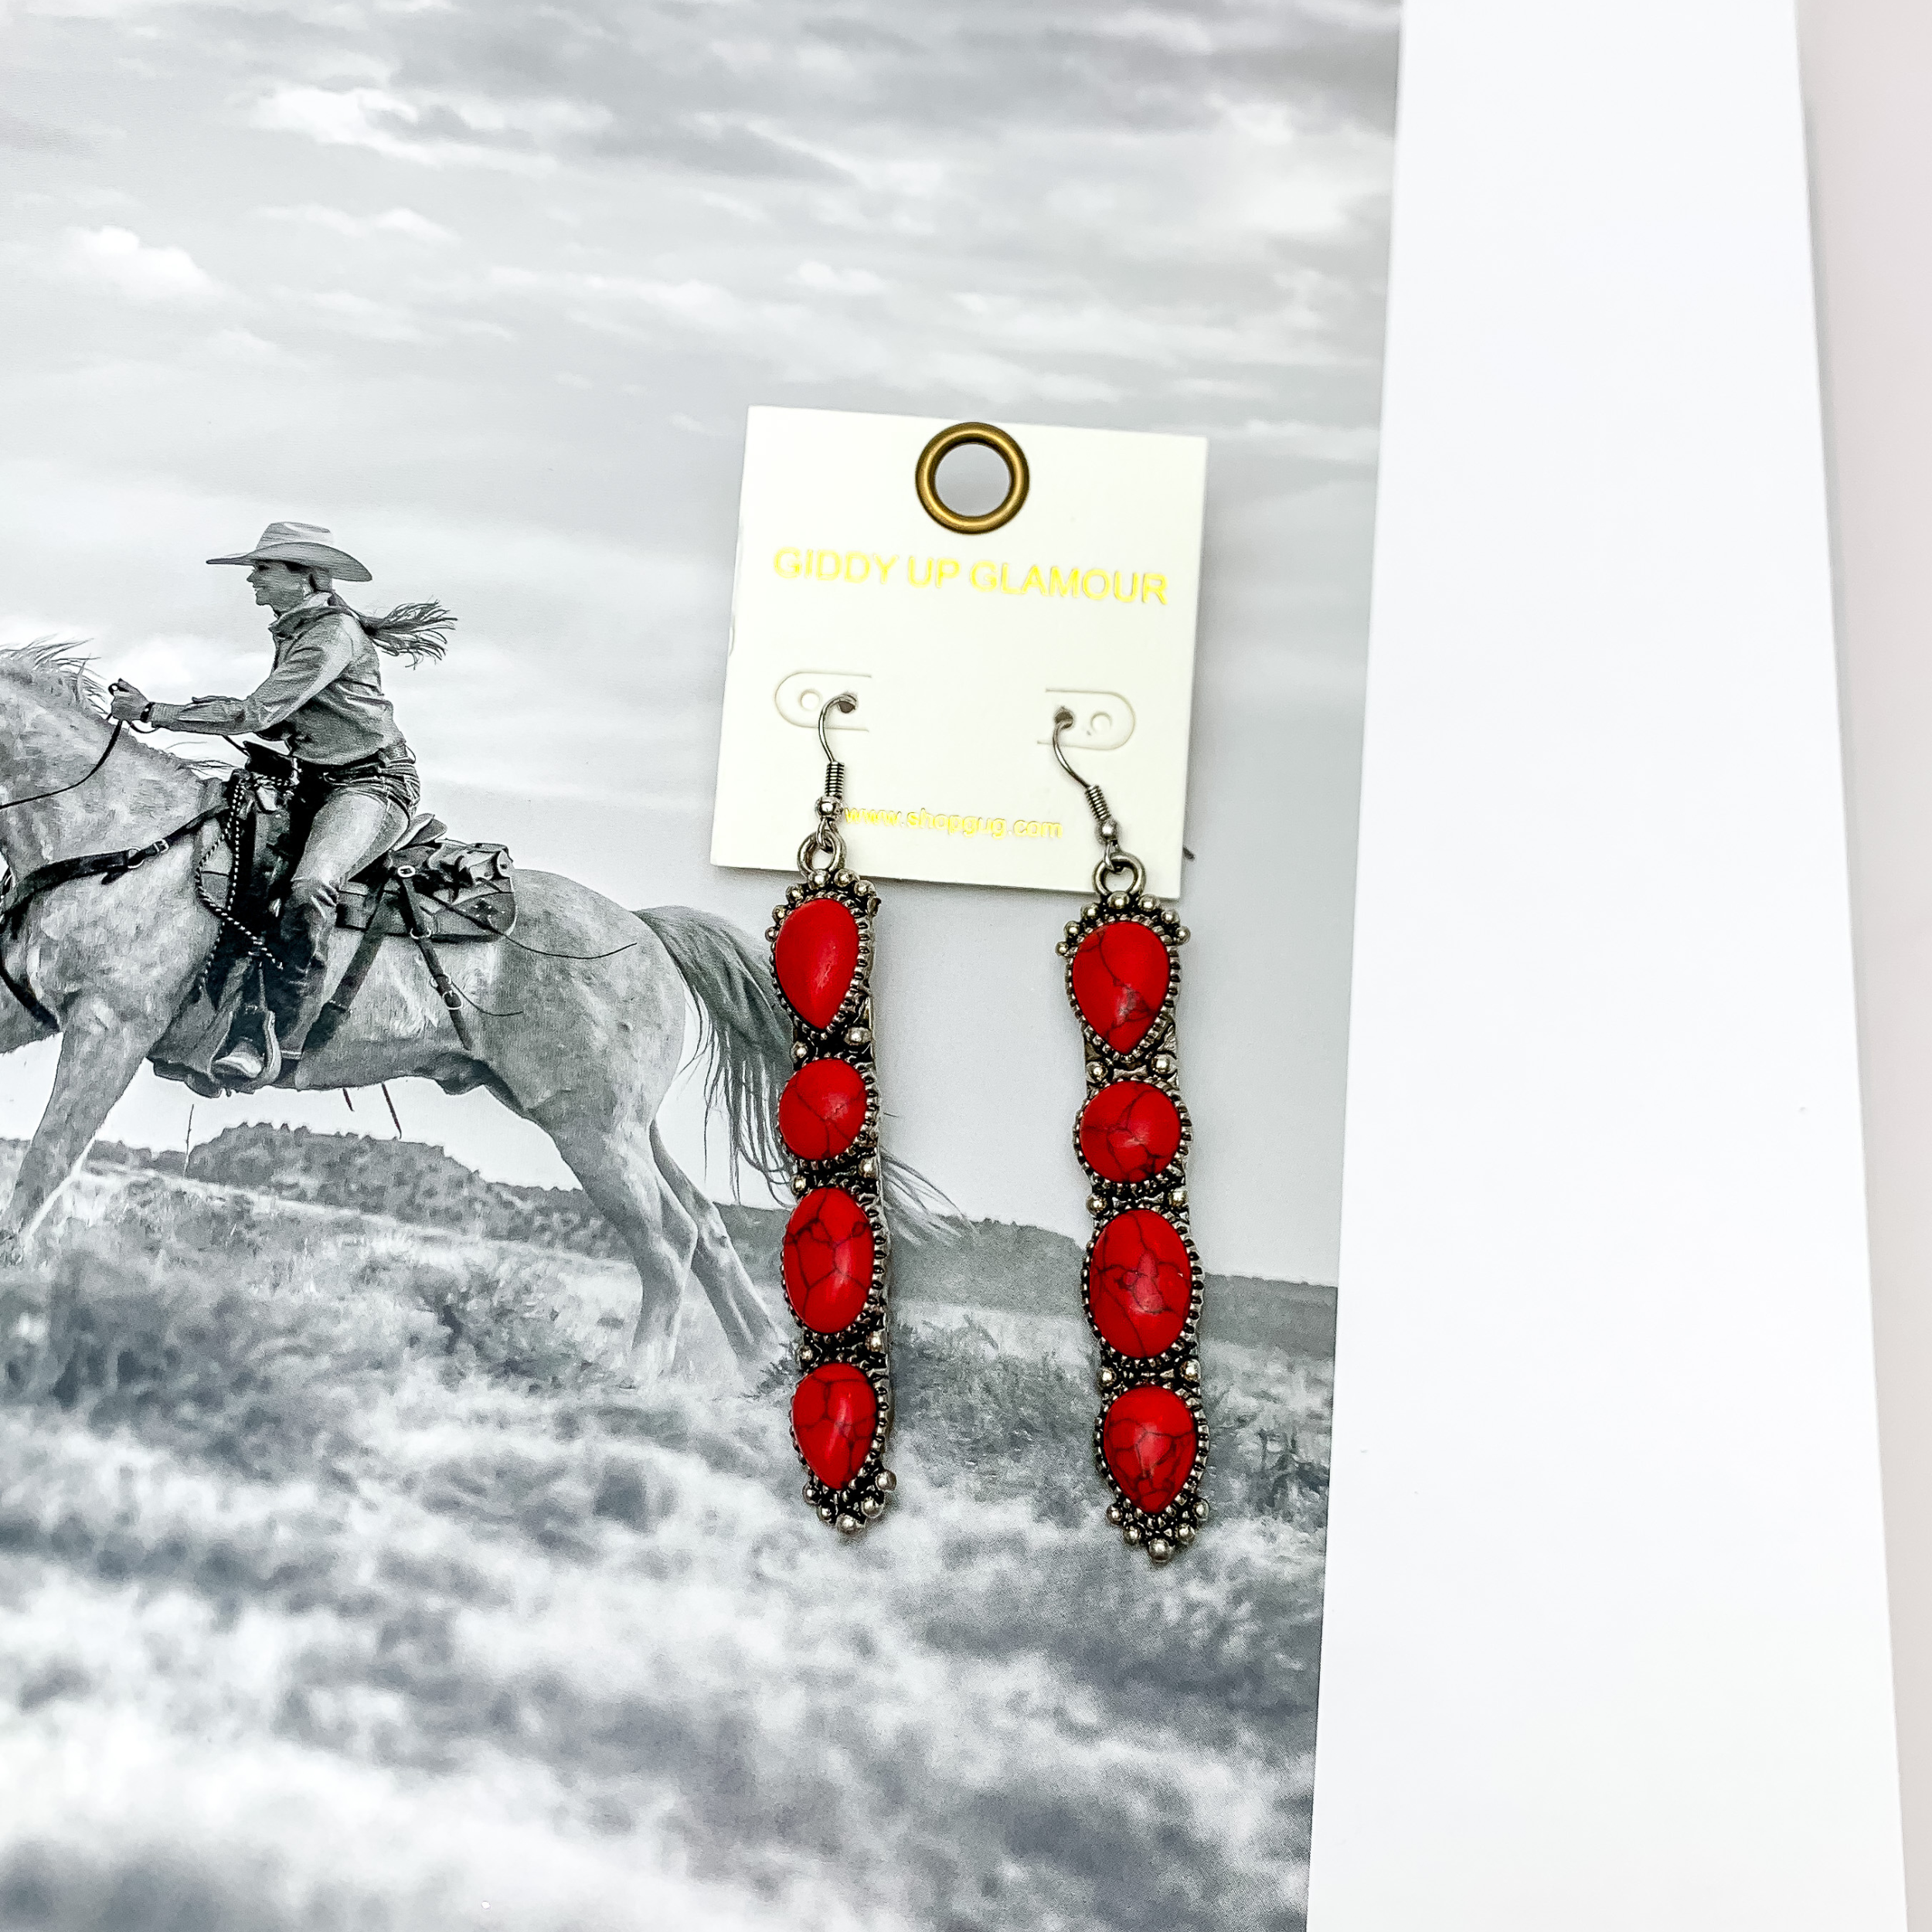 Western Connection Silver Tone Earrings With Four Stones in Red. Pictured with a western scene in the background.